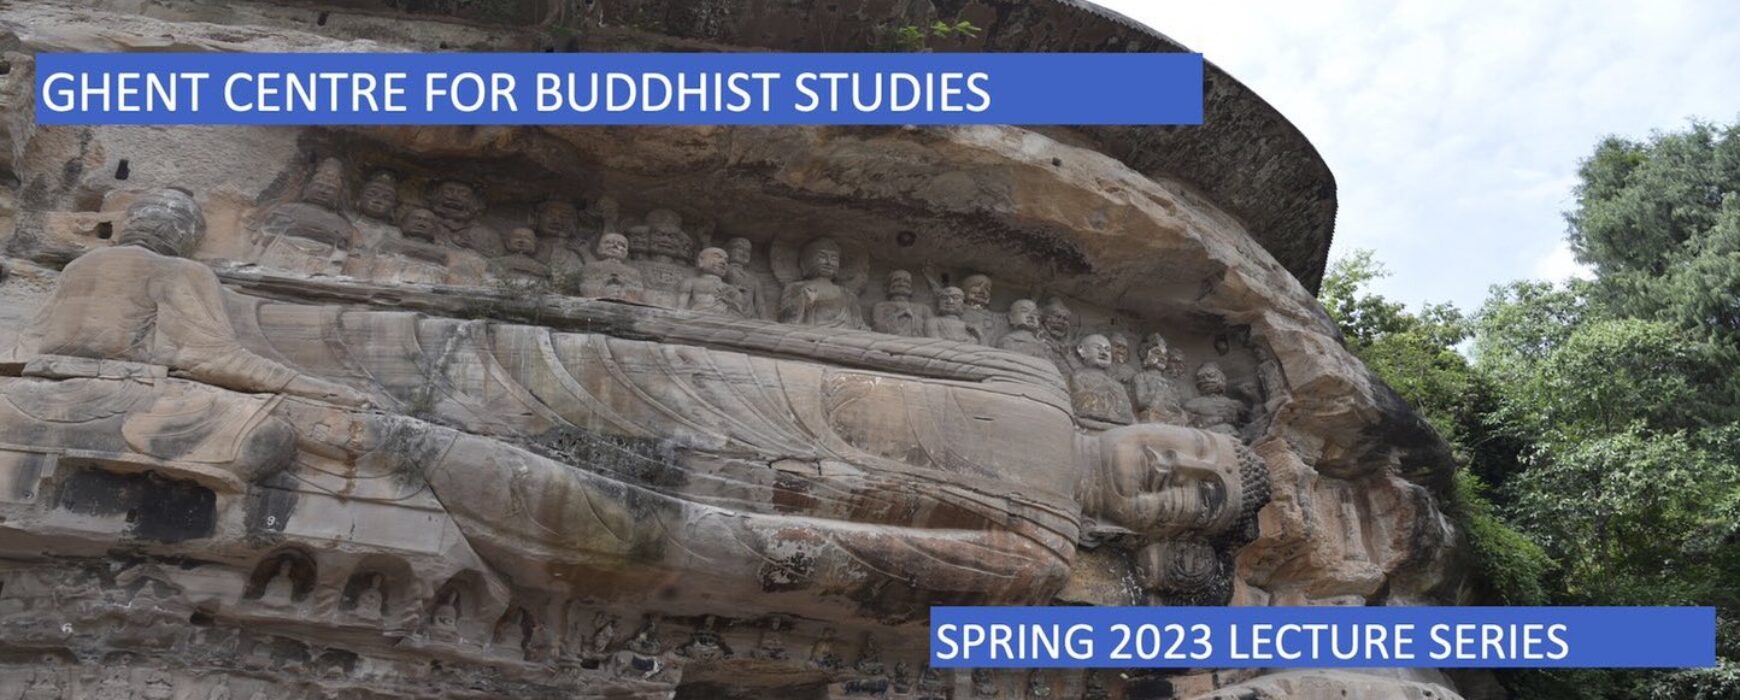 Lecture Series 2023: Permanent Training in Buddhist Studies (PTBS)